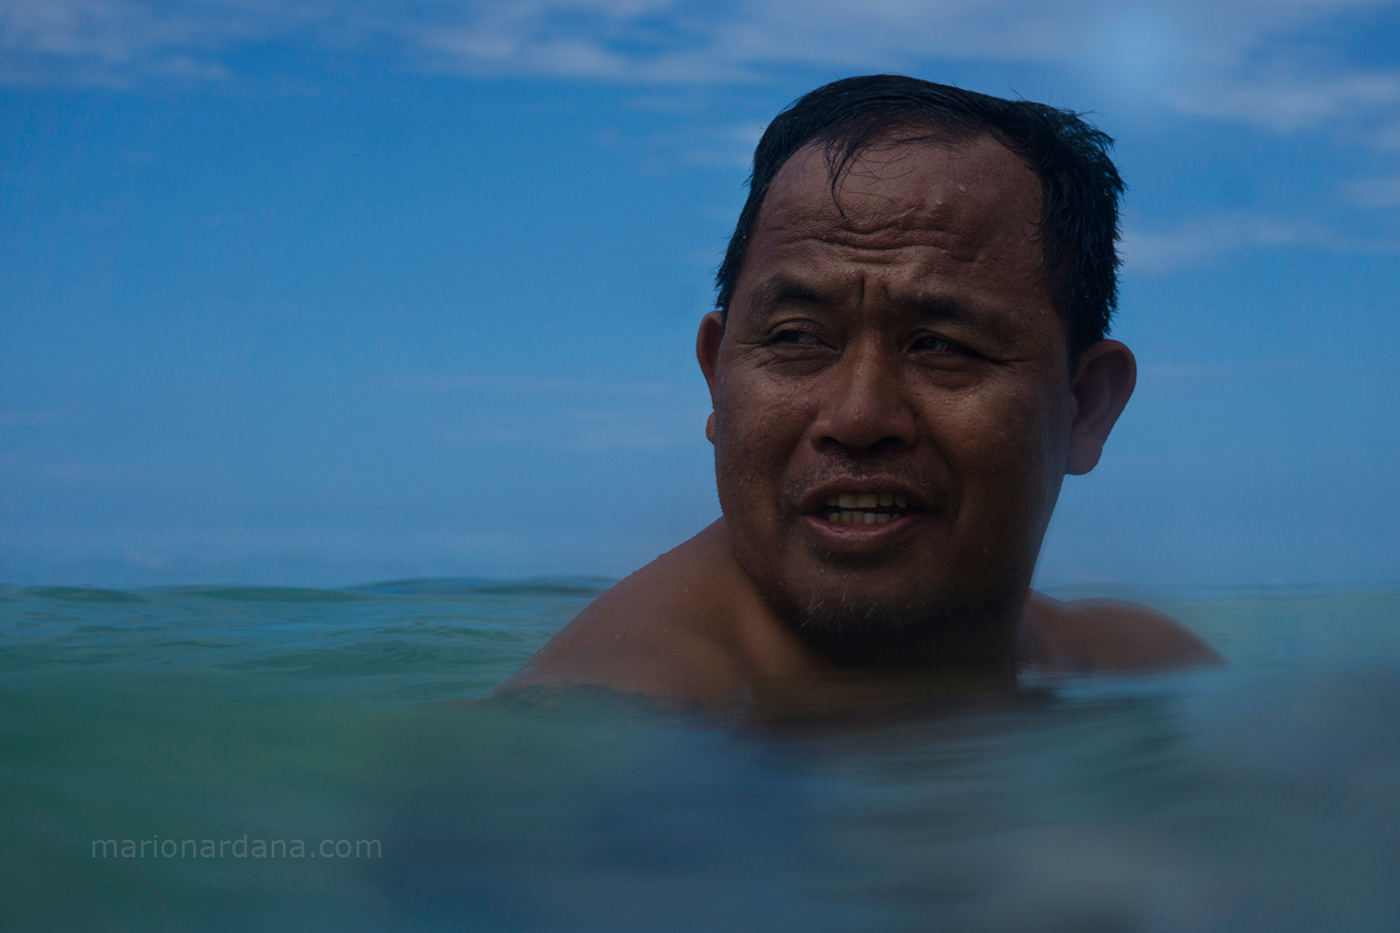 A portrait of a man submerged in the water.